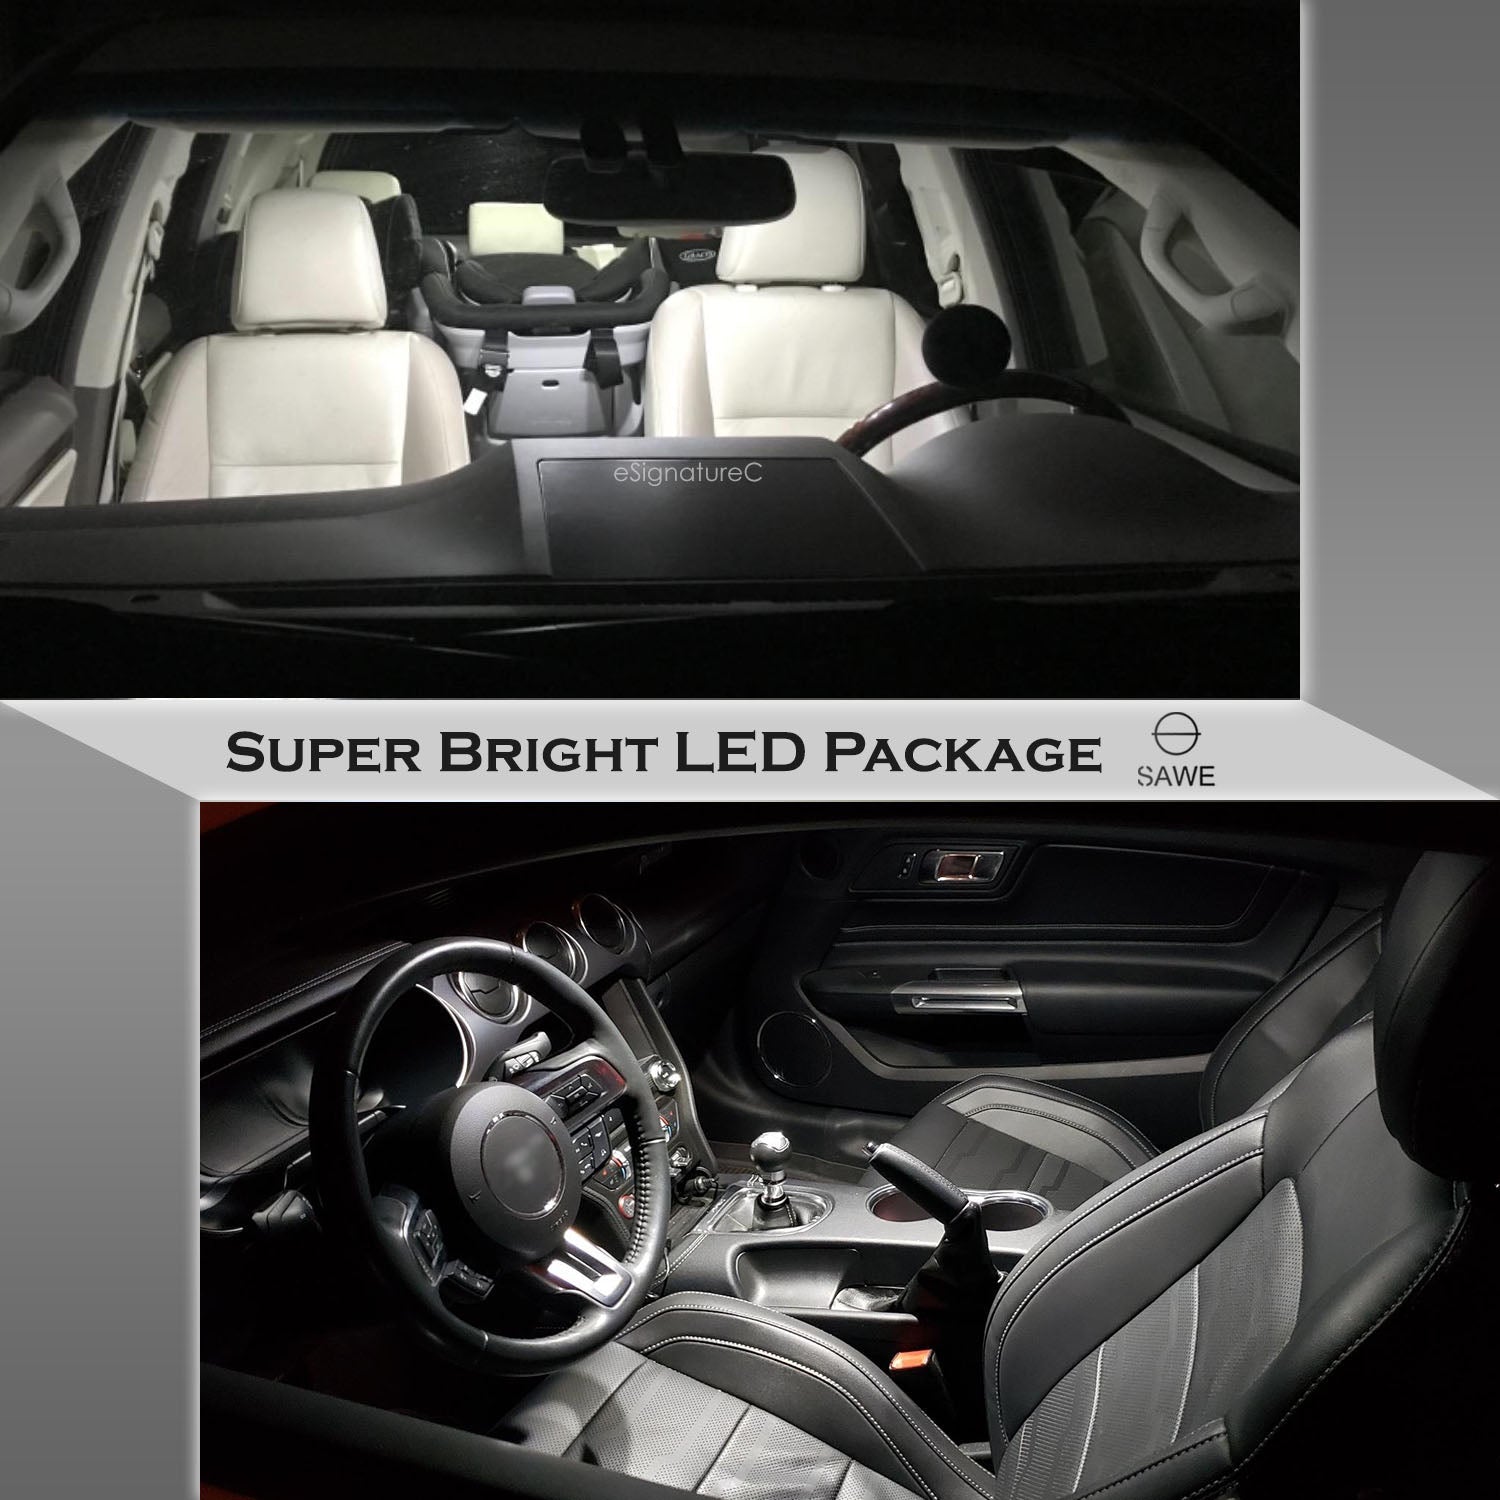 For Cadillac STS Interior LED Lights - Dome & Map Light Bulbs Package Kit for 2005 - 2012 - White